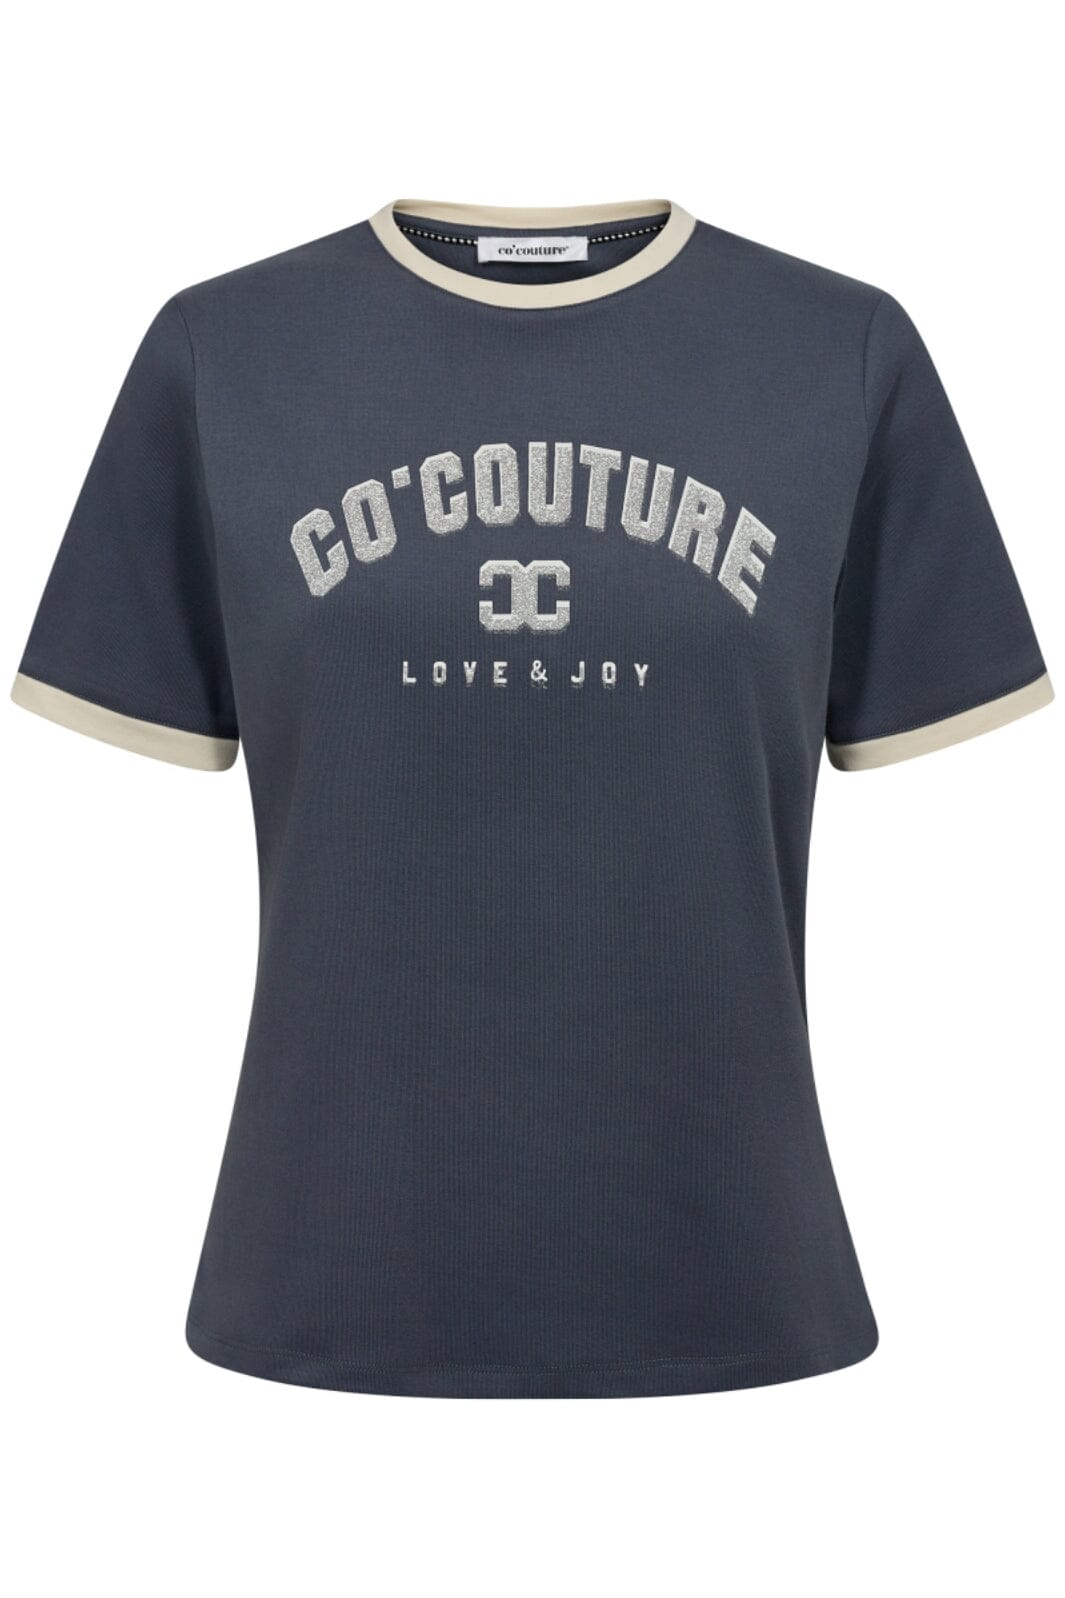 Co´couture - Edgecc Tee 33014 - 61 Ink T-shirts 